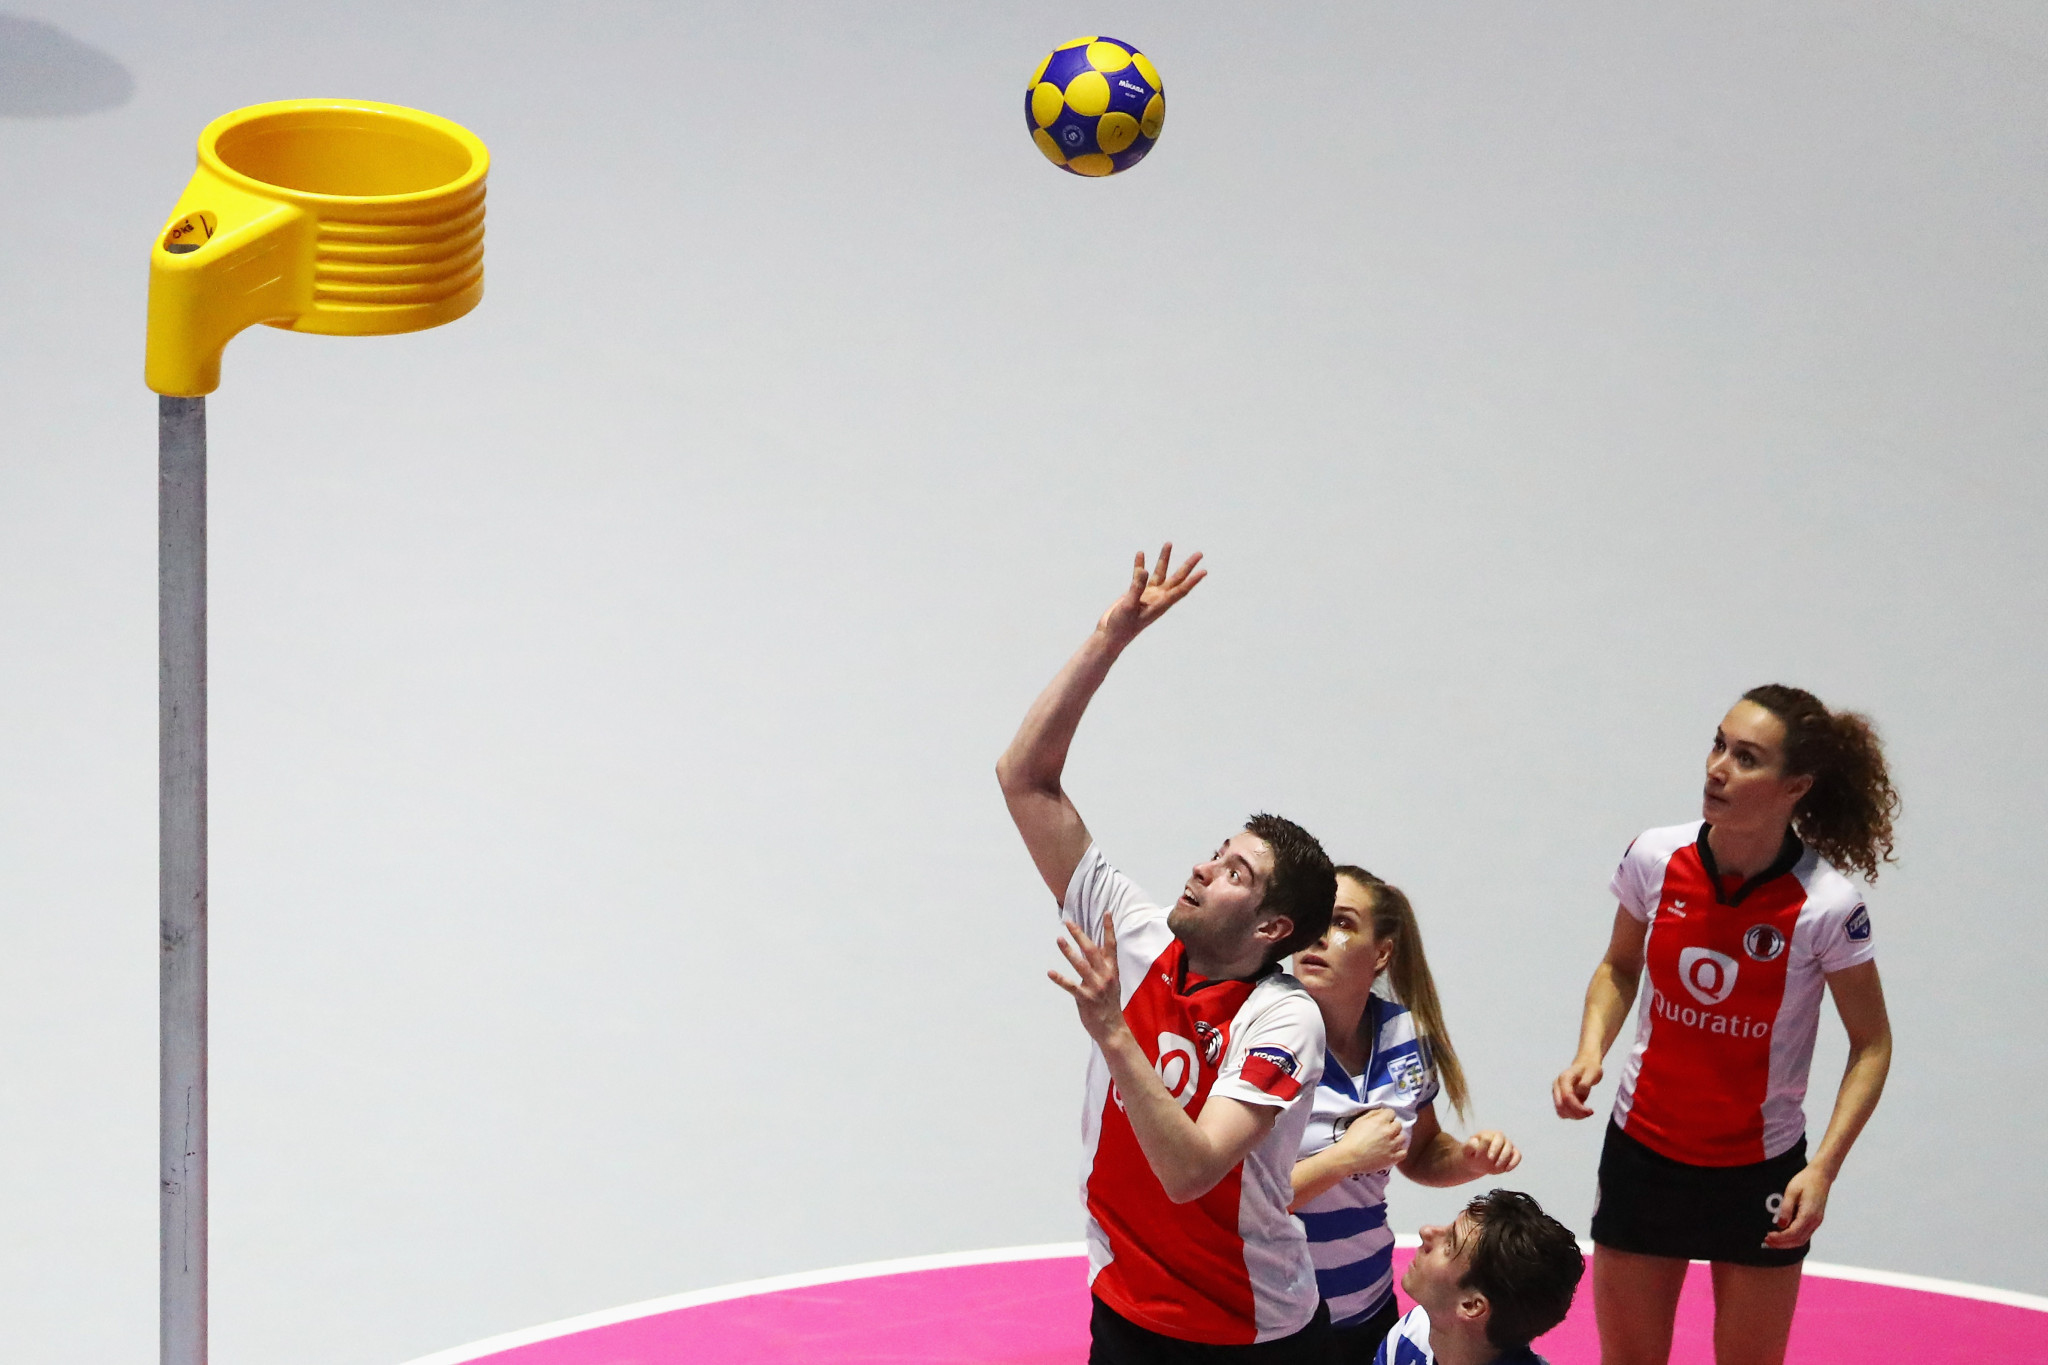 The International Korfball Federation's Olympic Format Taskforce is to evaluate the sport's smaller formats for potential Olympic inclusion ©Getty Images